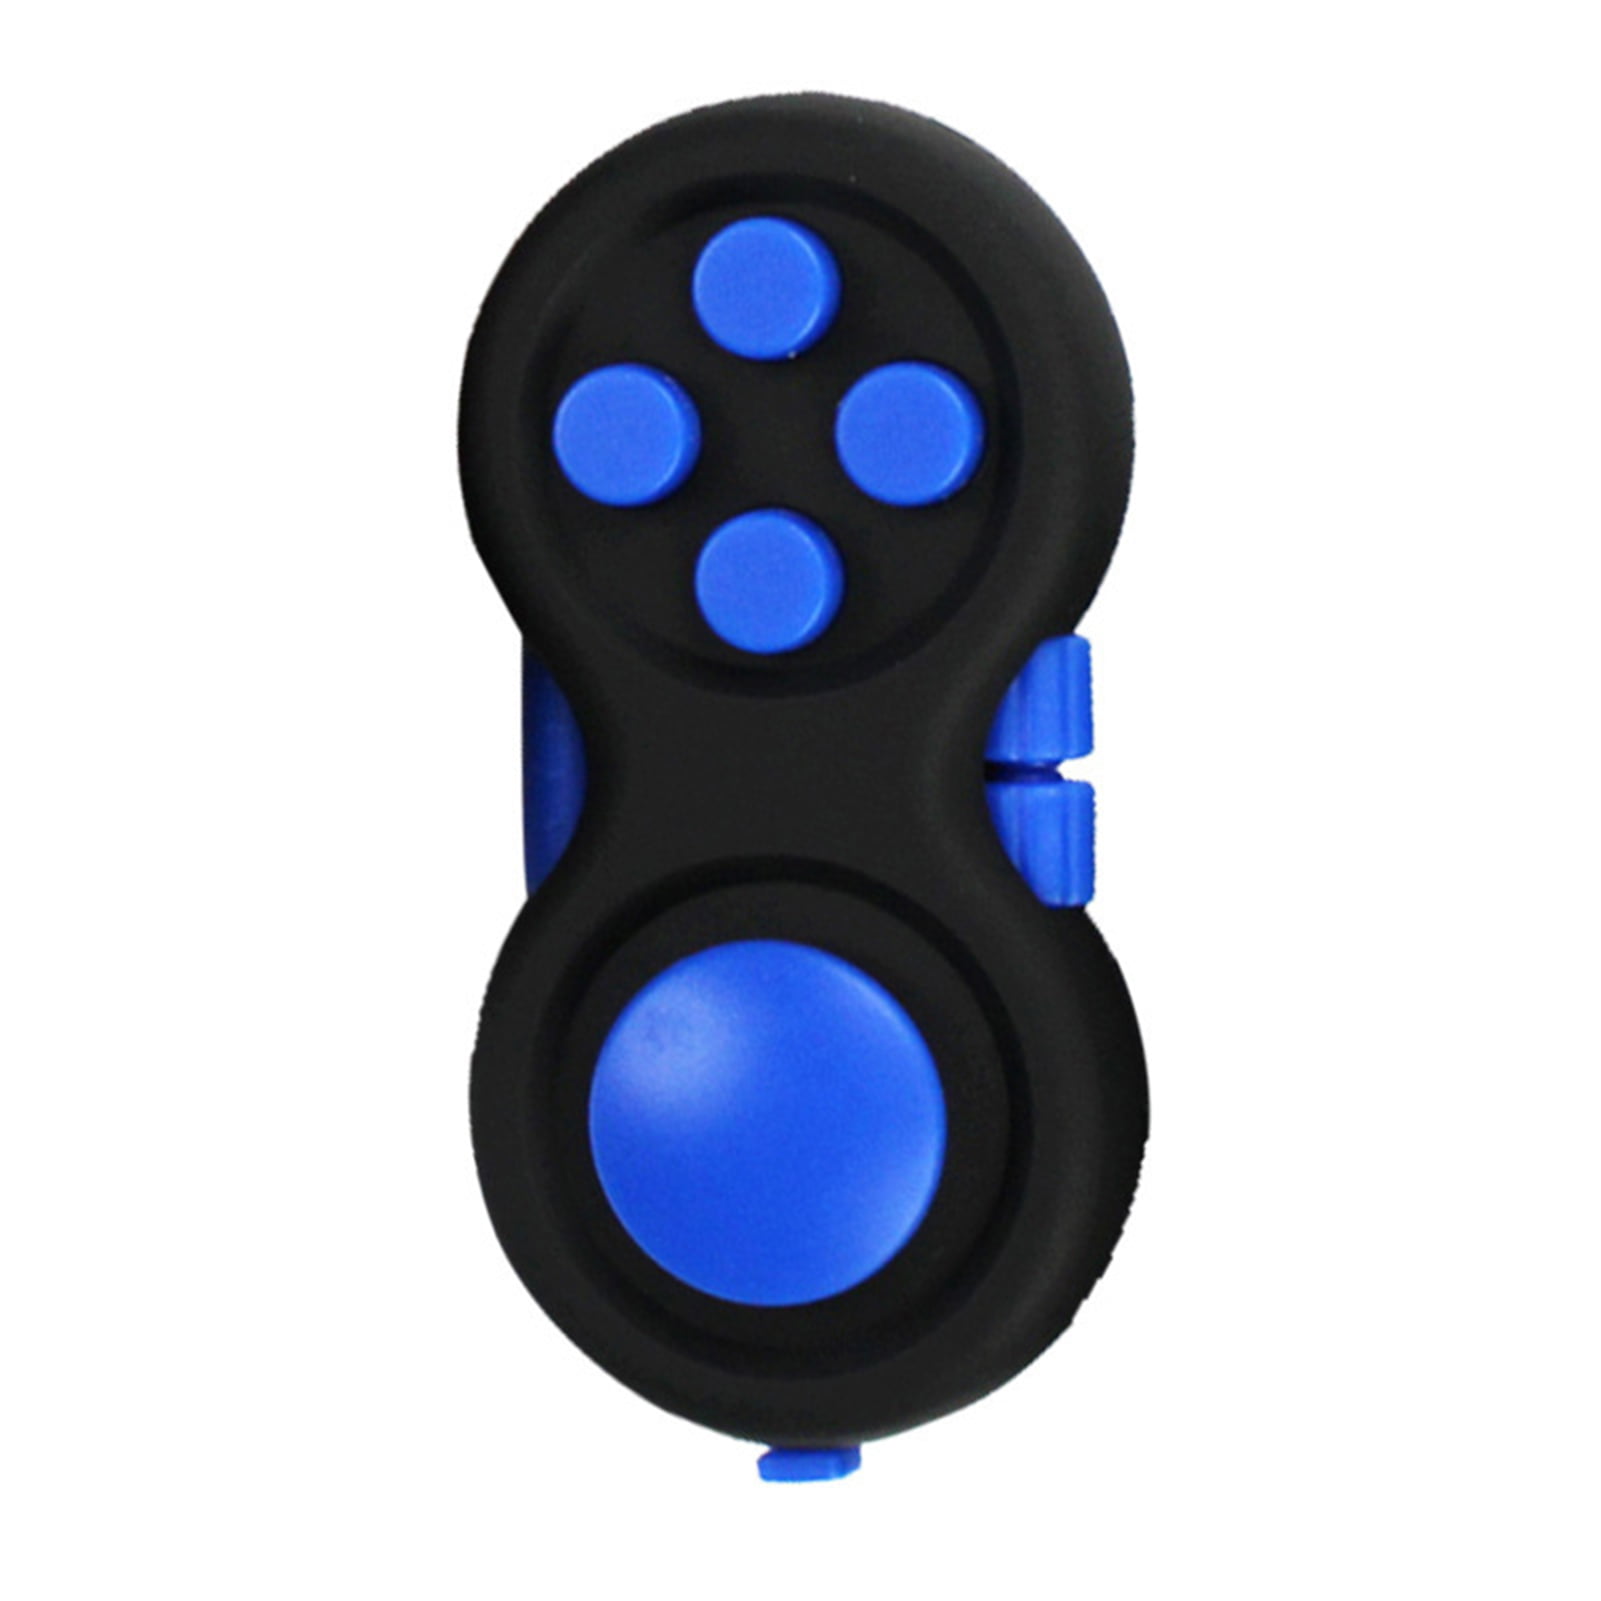 Details about   Fidget Controller Pad Stress Reducer/Relief 